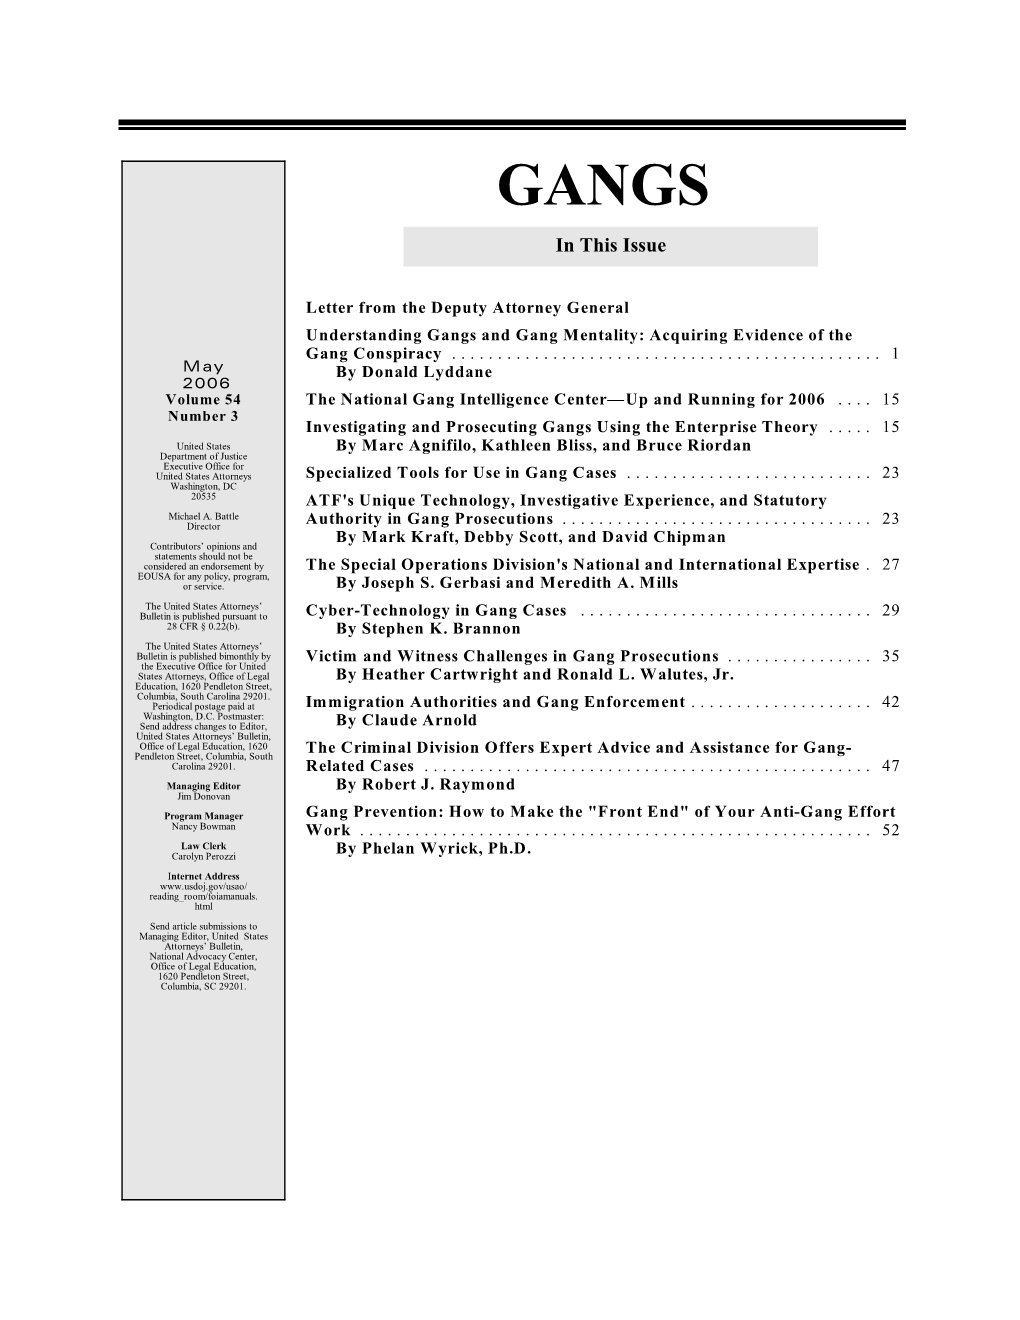 The United States Attorney Bulletin on Gang Prosecutions